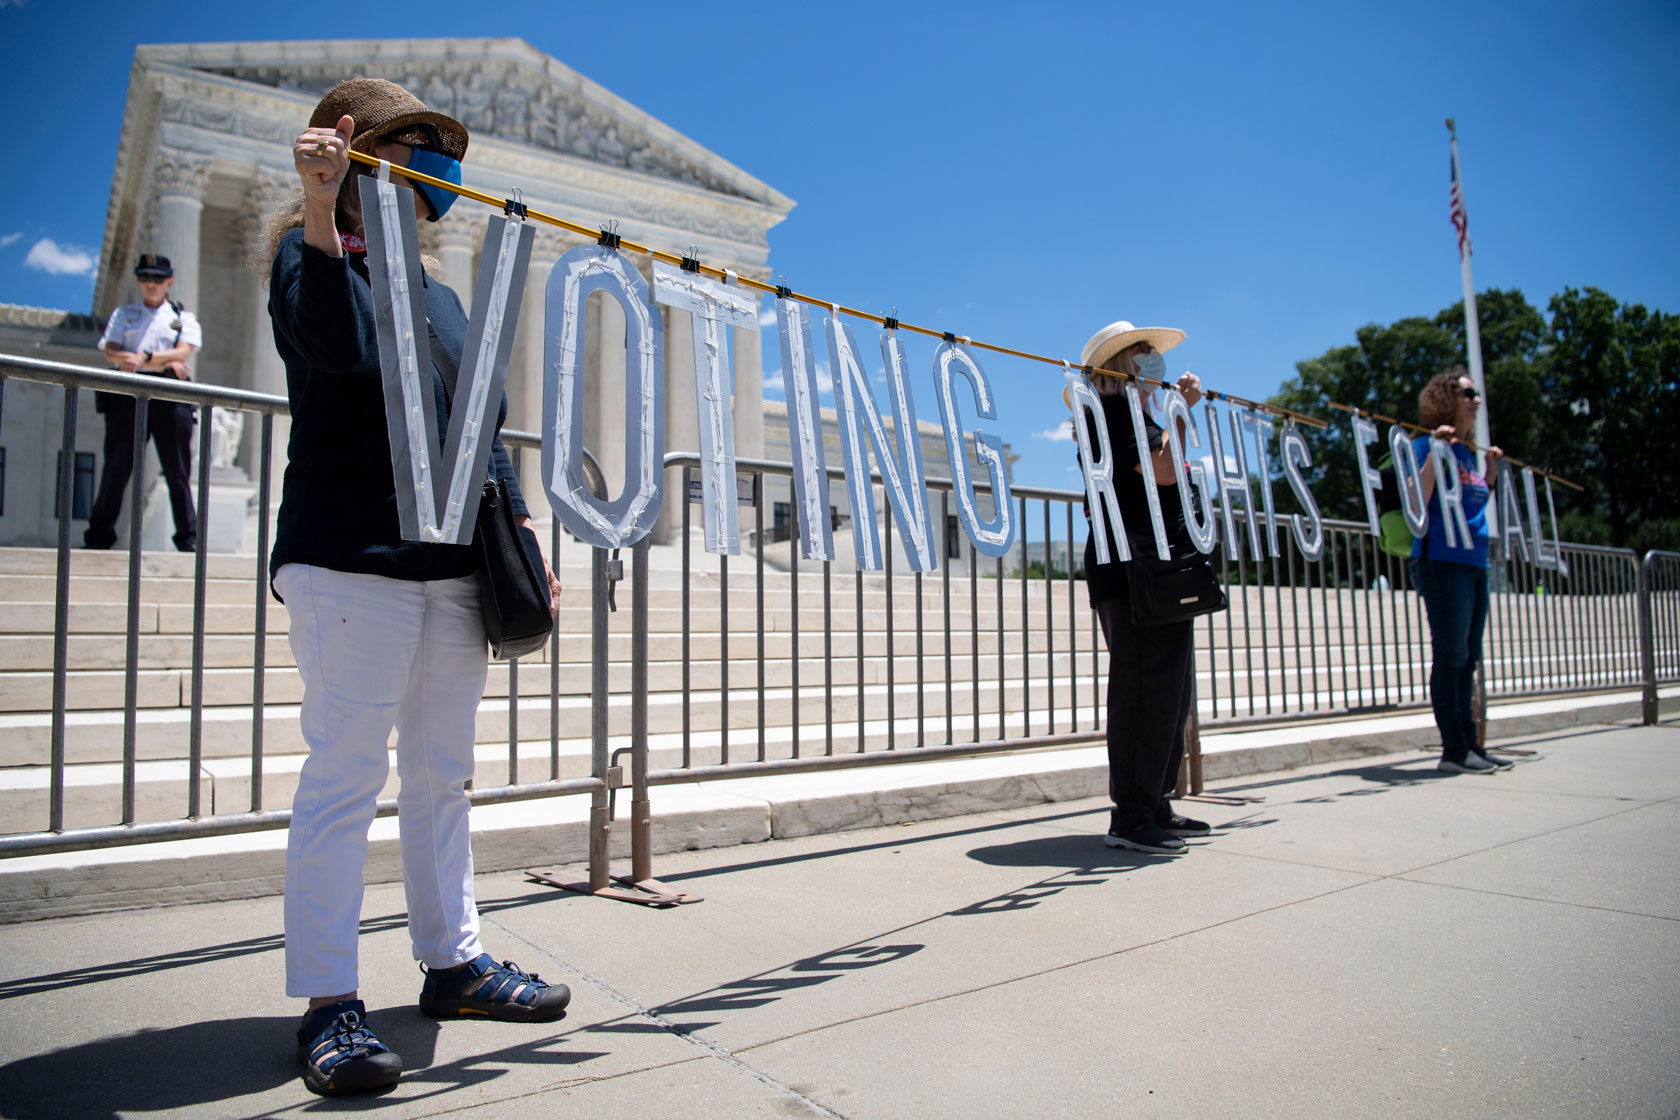 Three demonstrators hold a sign advocating for voting rights for all outside of the U.S. Supreme Court building.